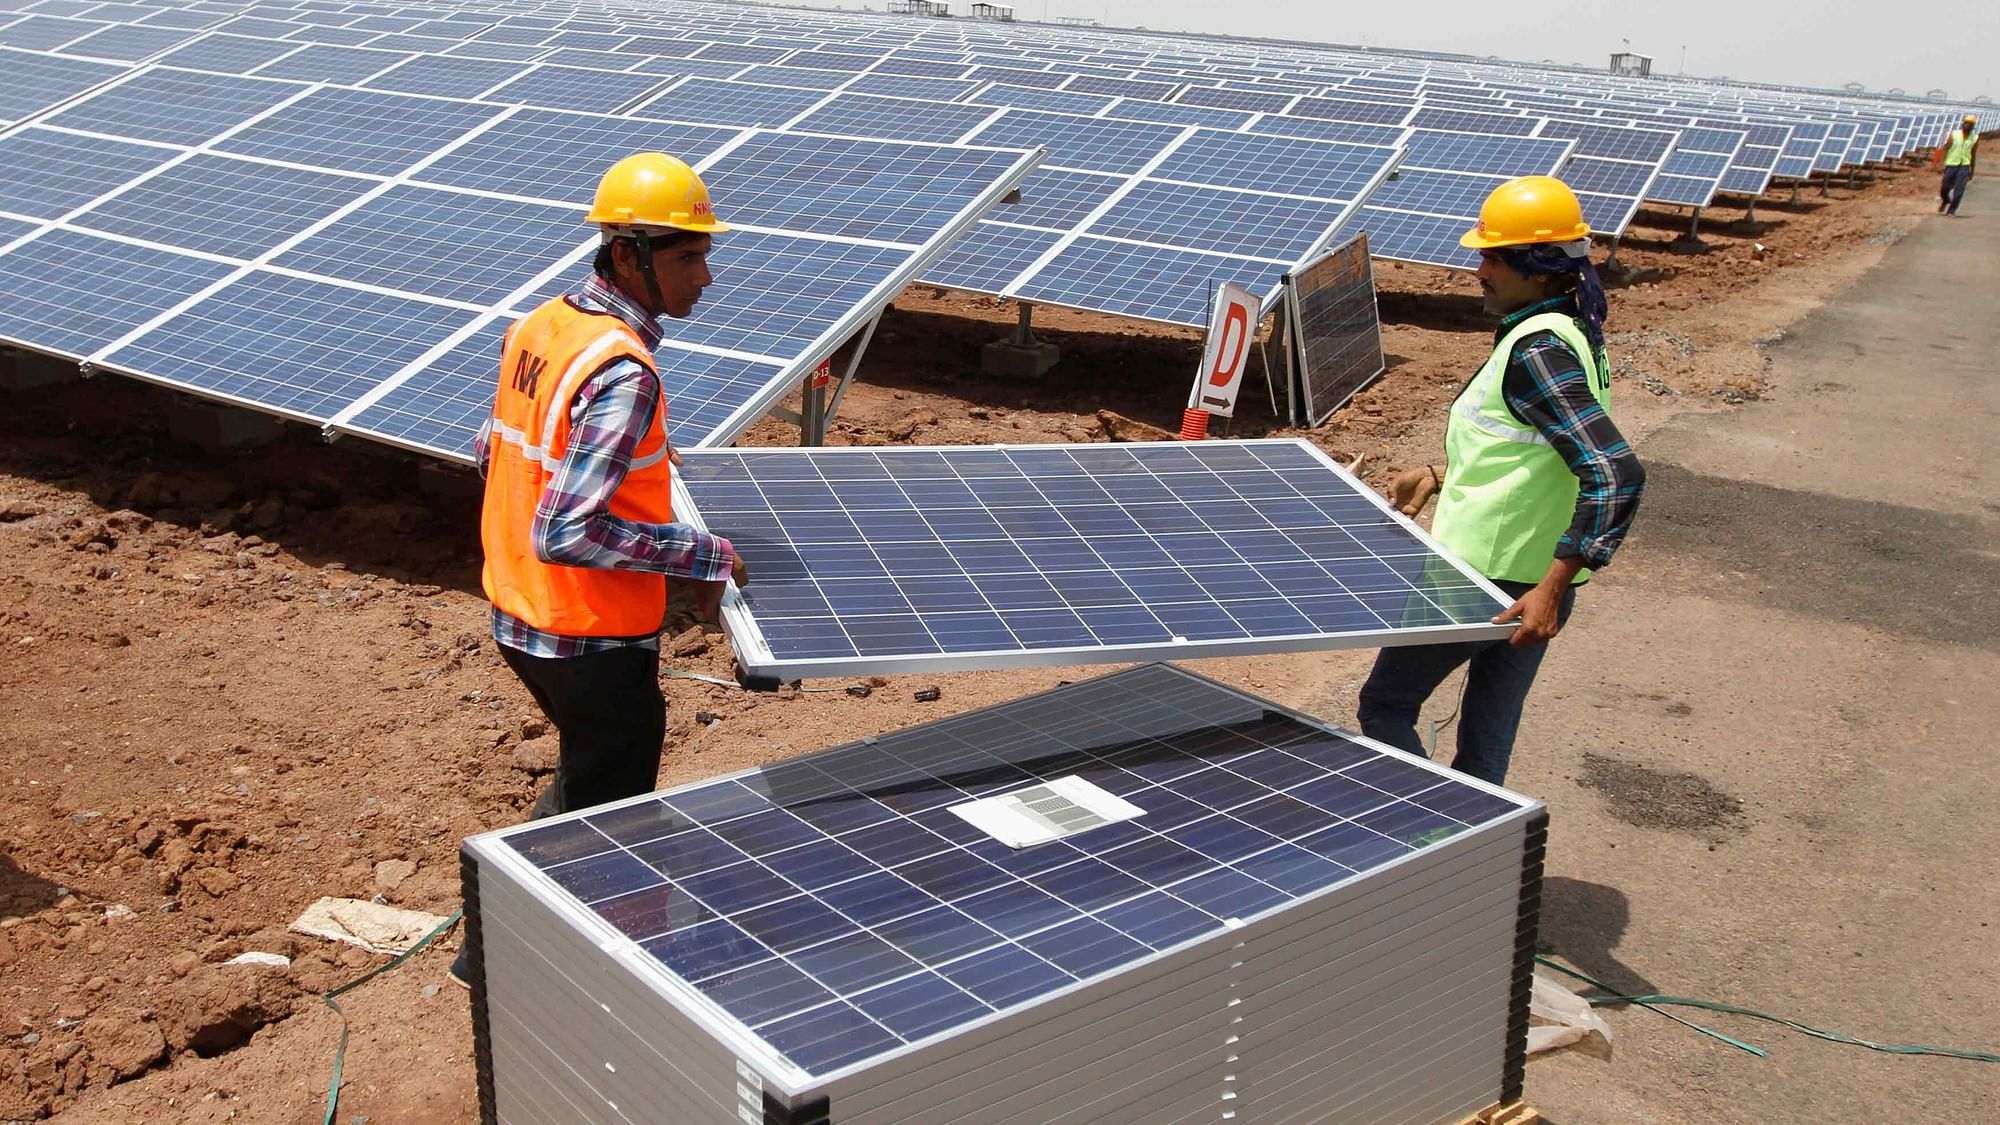 Workers carry photovoltaic solar panels for installation at the Gujarat solar park. (Photo: Reuters)